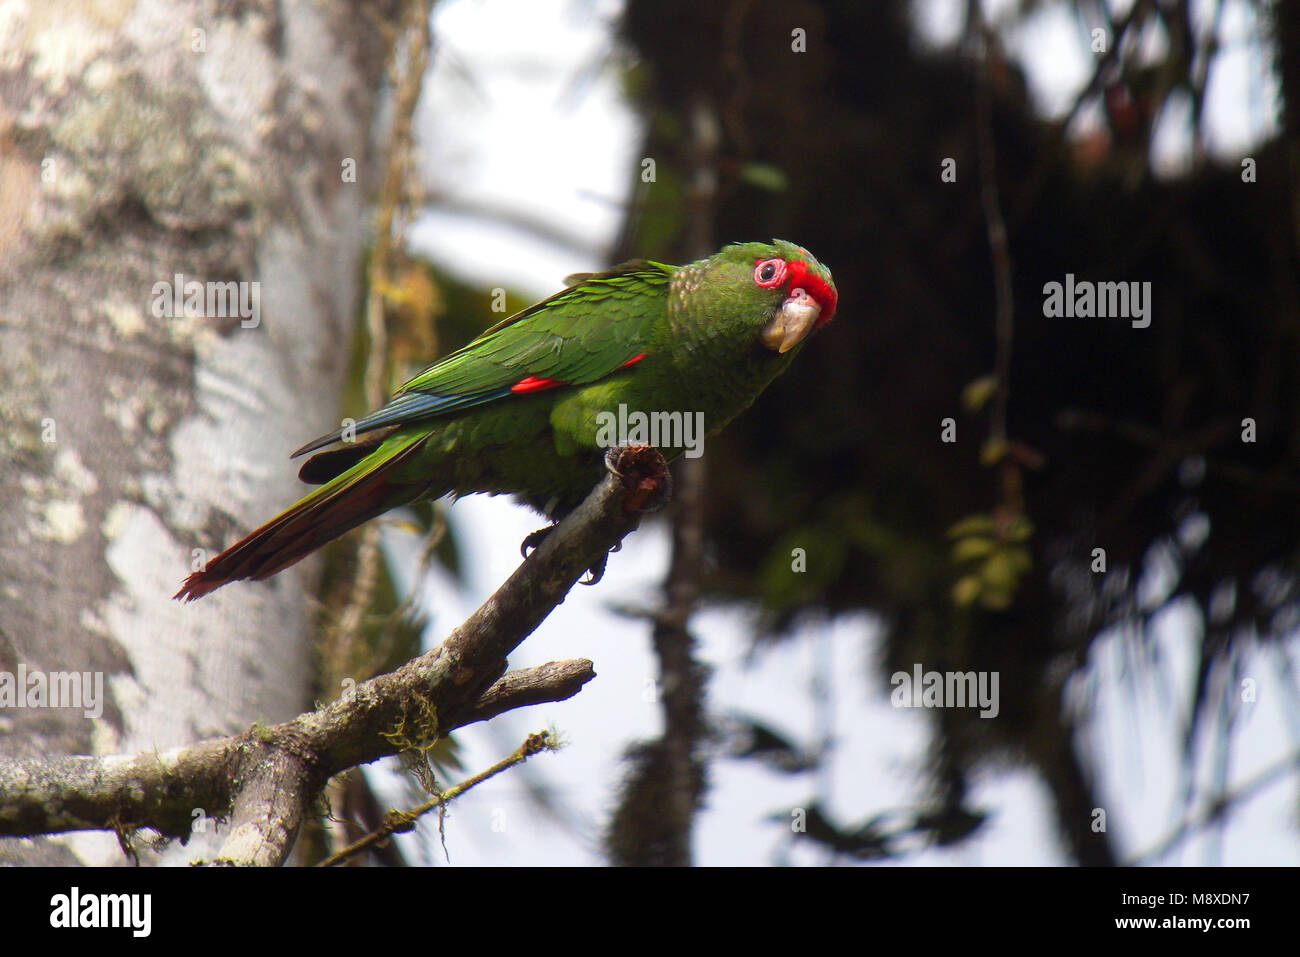 Page 2 - Recently Described Species High Resolution Stock Photography and  Images - Alamy